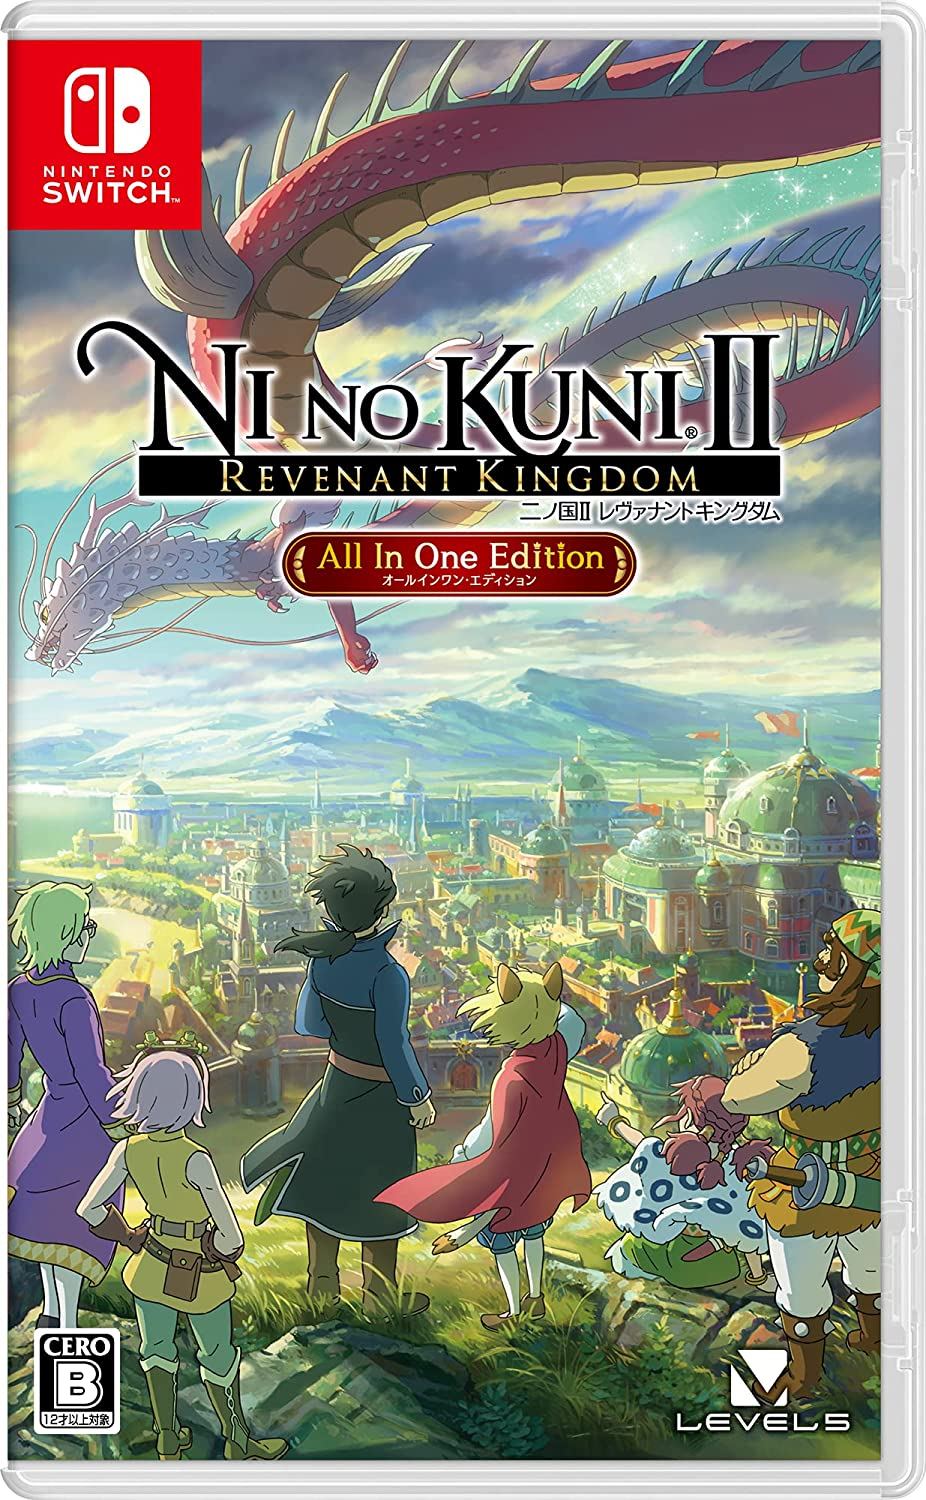 Everything You Need to Know About Ni no Kuni II: Revenant Kingdom